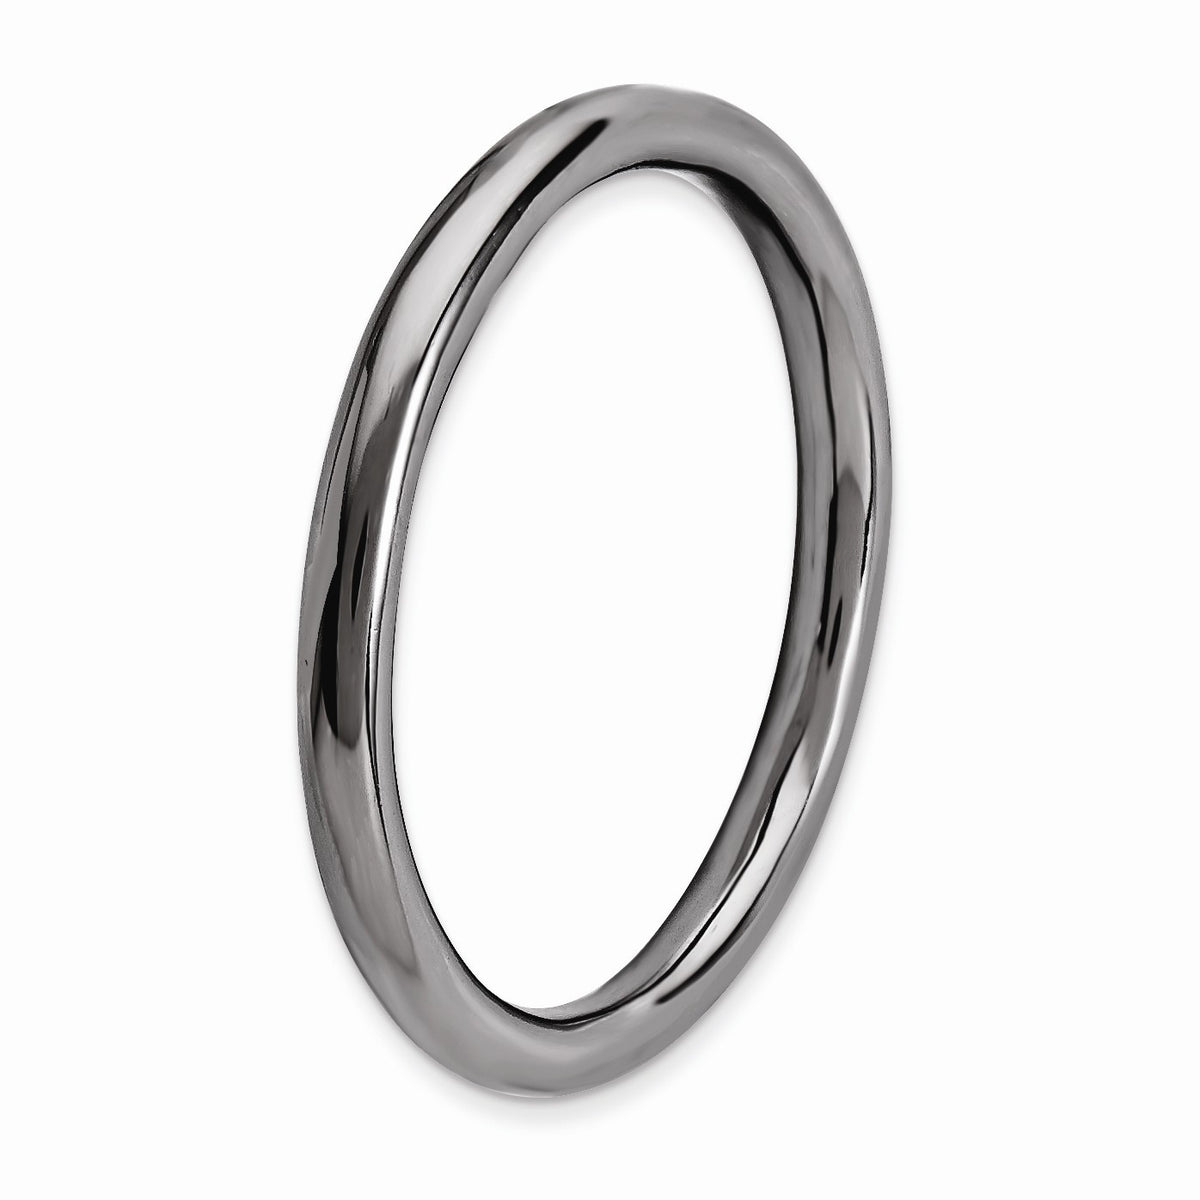 Alternate view of the 2.25mm Black Ruthenium Plated Sterling Silver Stackable Polished Band by The Black Bow Jewelry Co.